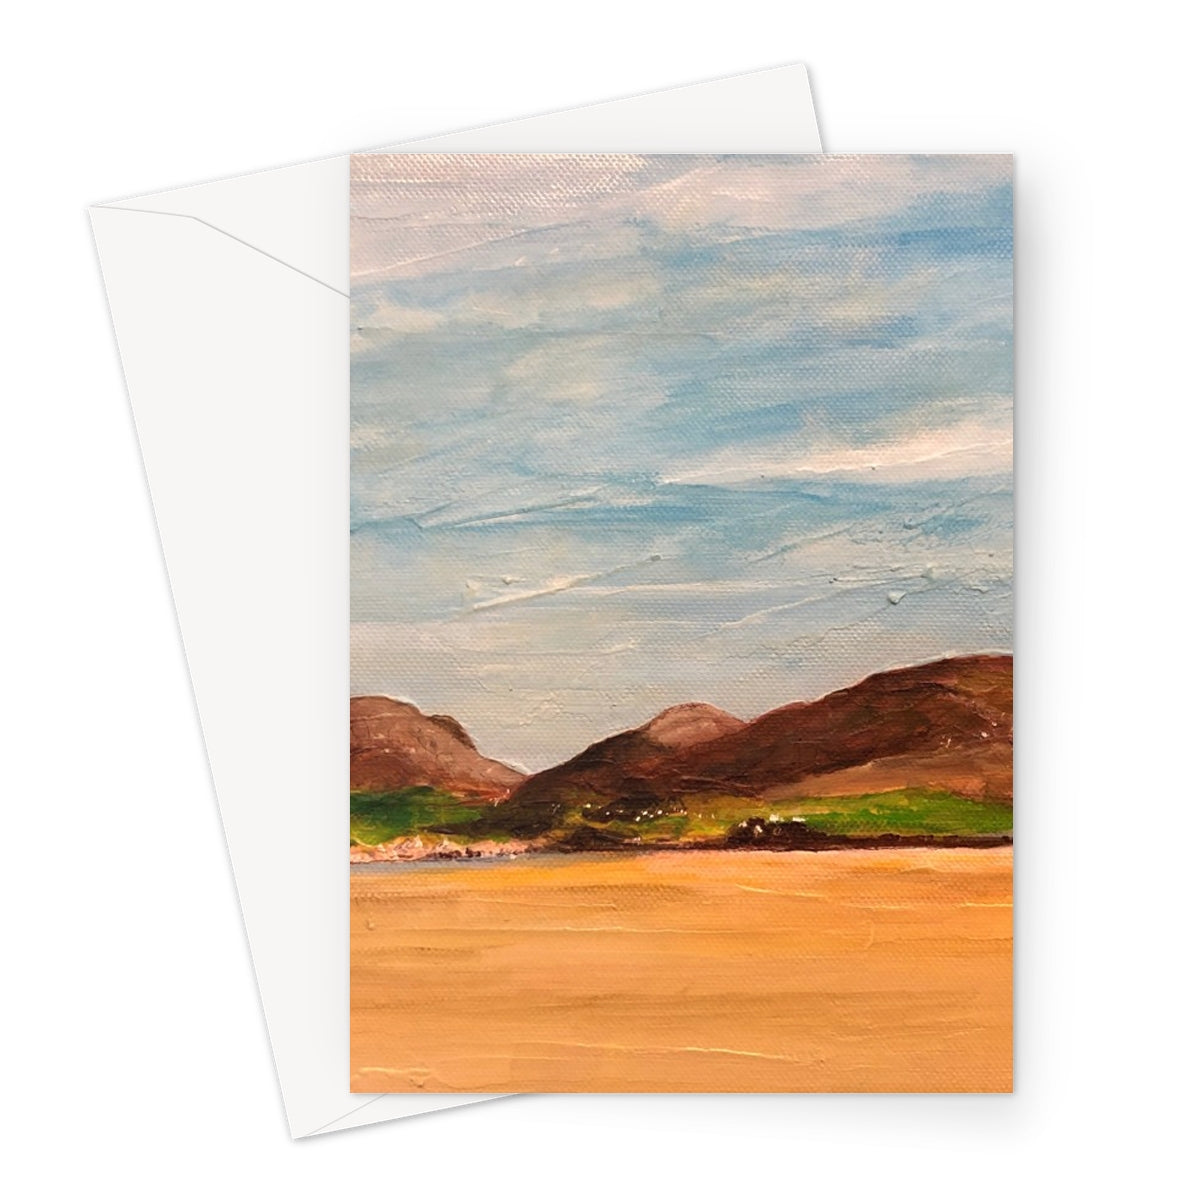 Uig Sands Lewis Art Gifts Greeting Card-Greetings Cards-Hebridean Islands Art Gallery-A5 Portrait-10 Cards-Paintings, Prints, Homeware, Art Gifts From Scotland By Scottish Artist Kevin Hunter